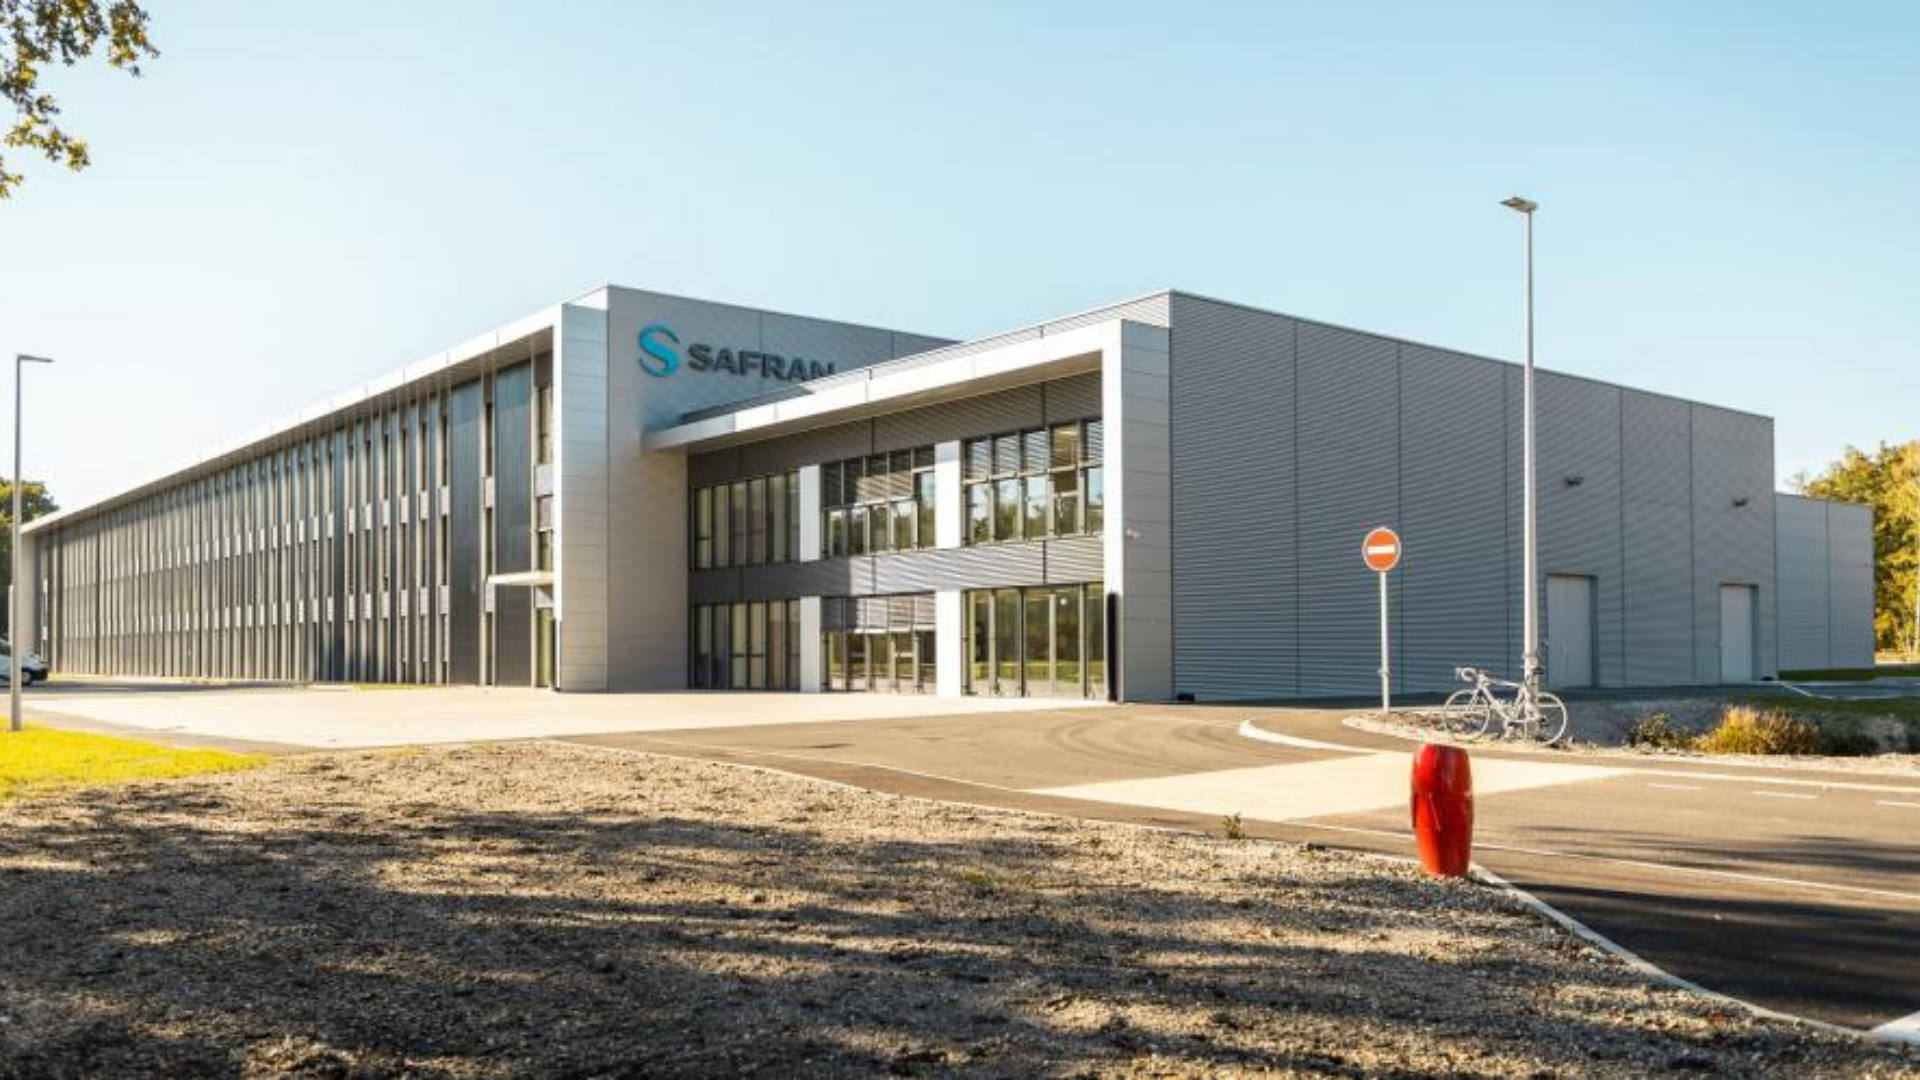 The Safran Additive Manufacturing Campus, the Group’s new center of excellence located in Le Haillan, near Bordeaux in southwest France